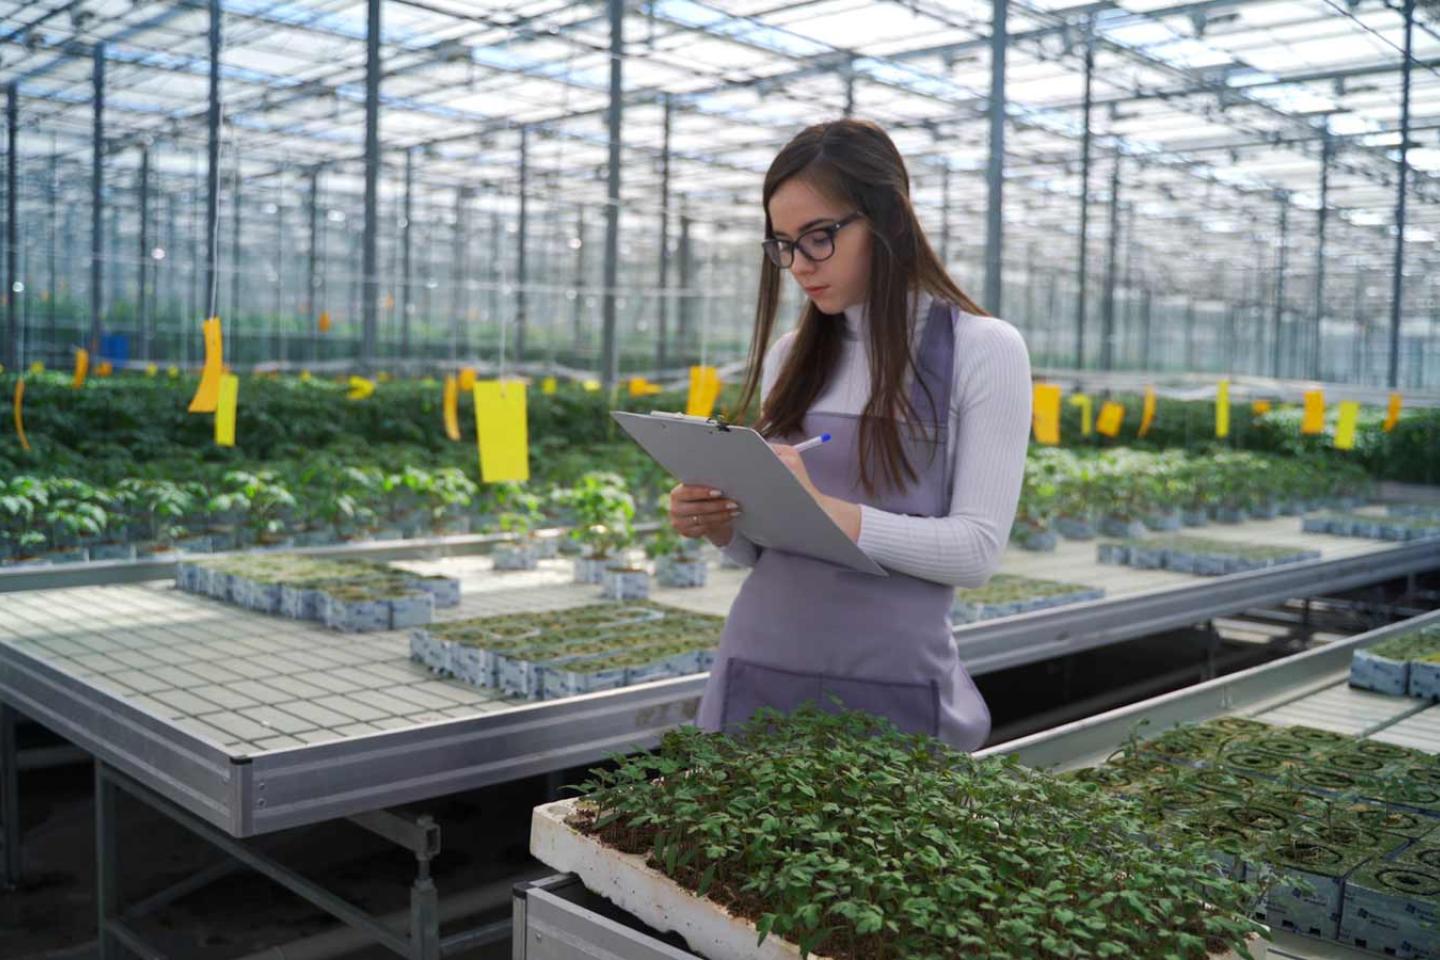 Picture of a woman tending plans in a glass hothouse